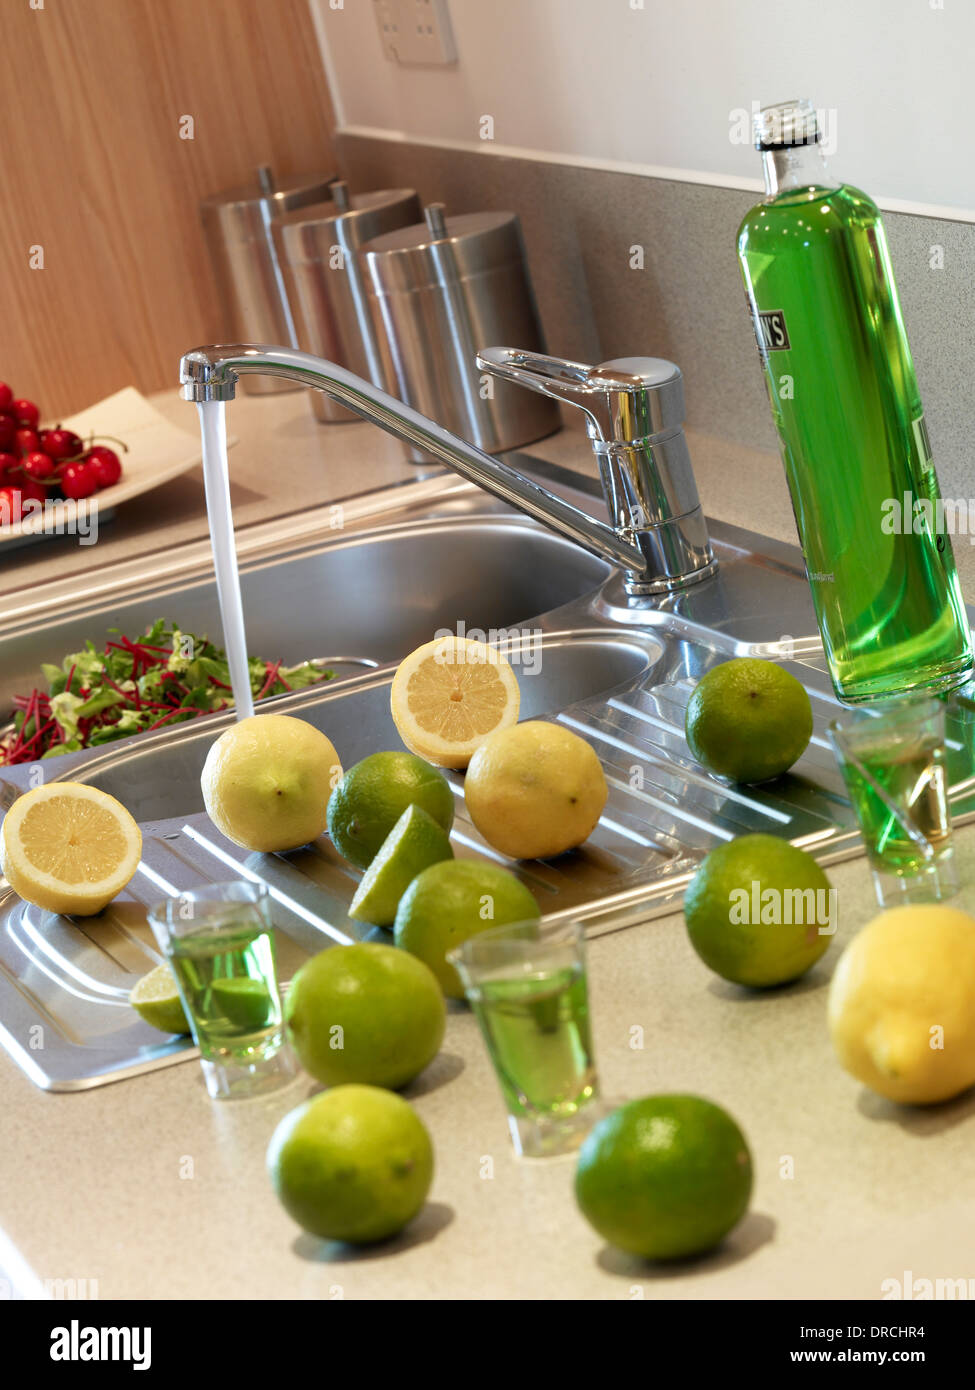 Food preparation at the kitchen sink. Stock Photo